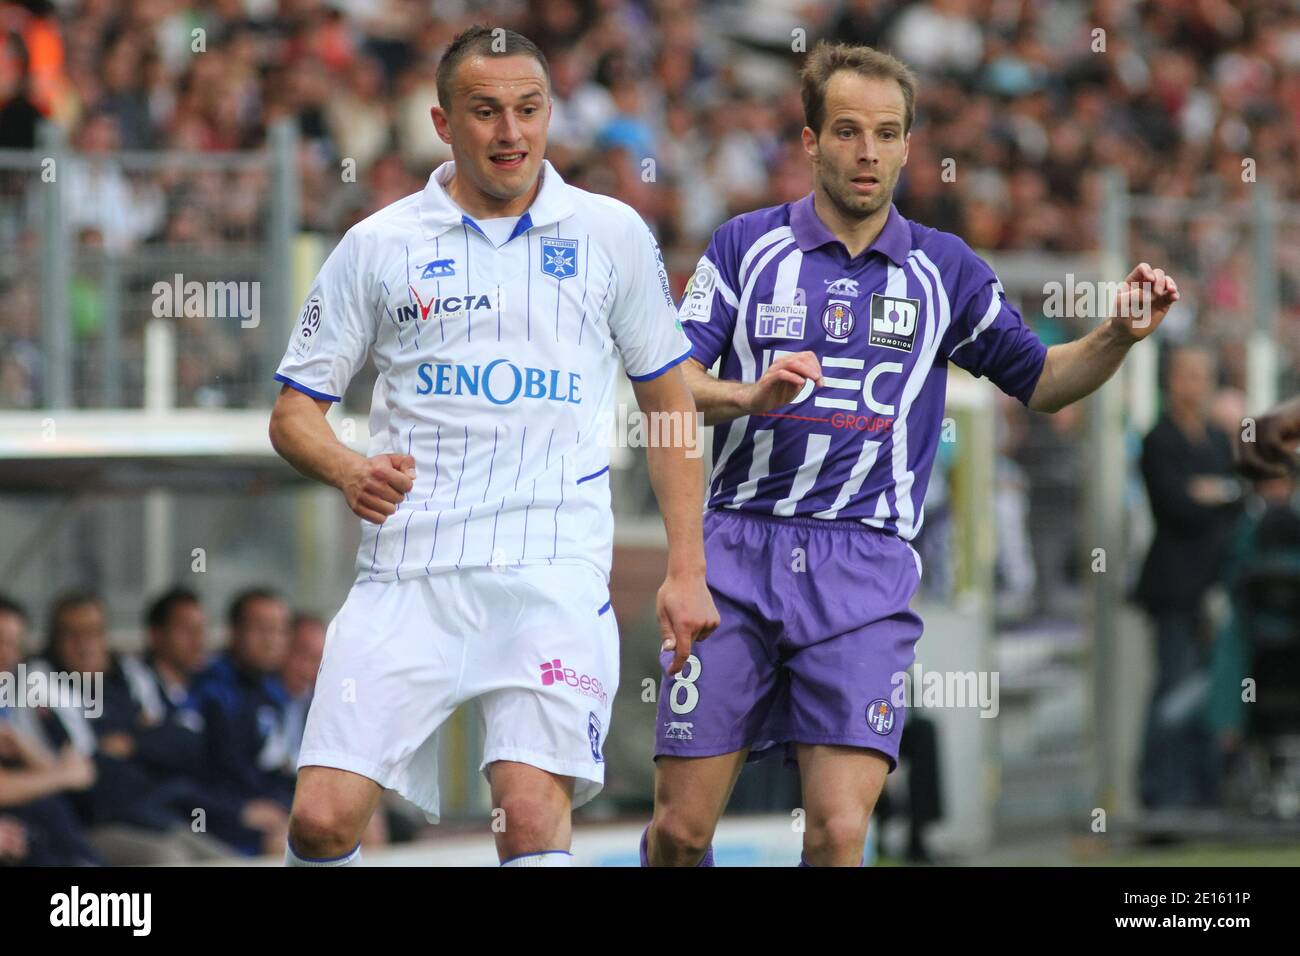 Auxerre Dariusz Dudka and Etienne Didot during the French First League soccer match, Toulouse vs Auxerre at stadium de Toulouse, France on April 16, 2011. Auxerre won 1-0. Photo by Paulo Dos Santos/ABACAPRESS.COM Stock Photo